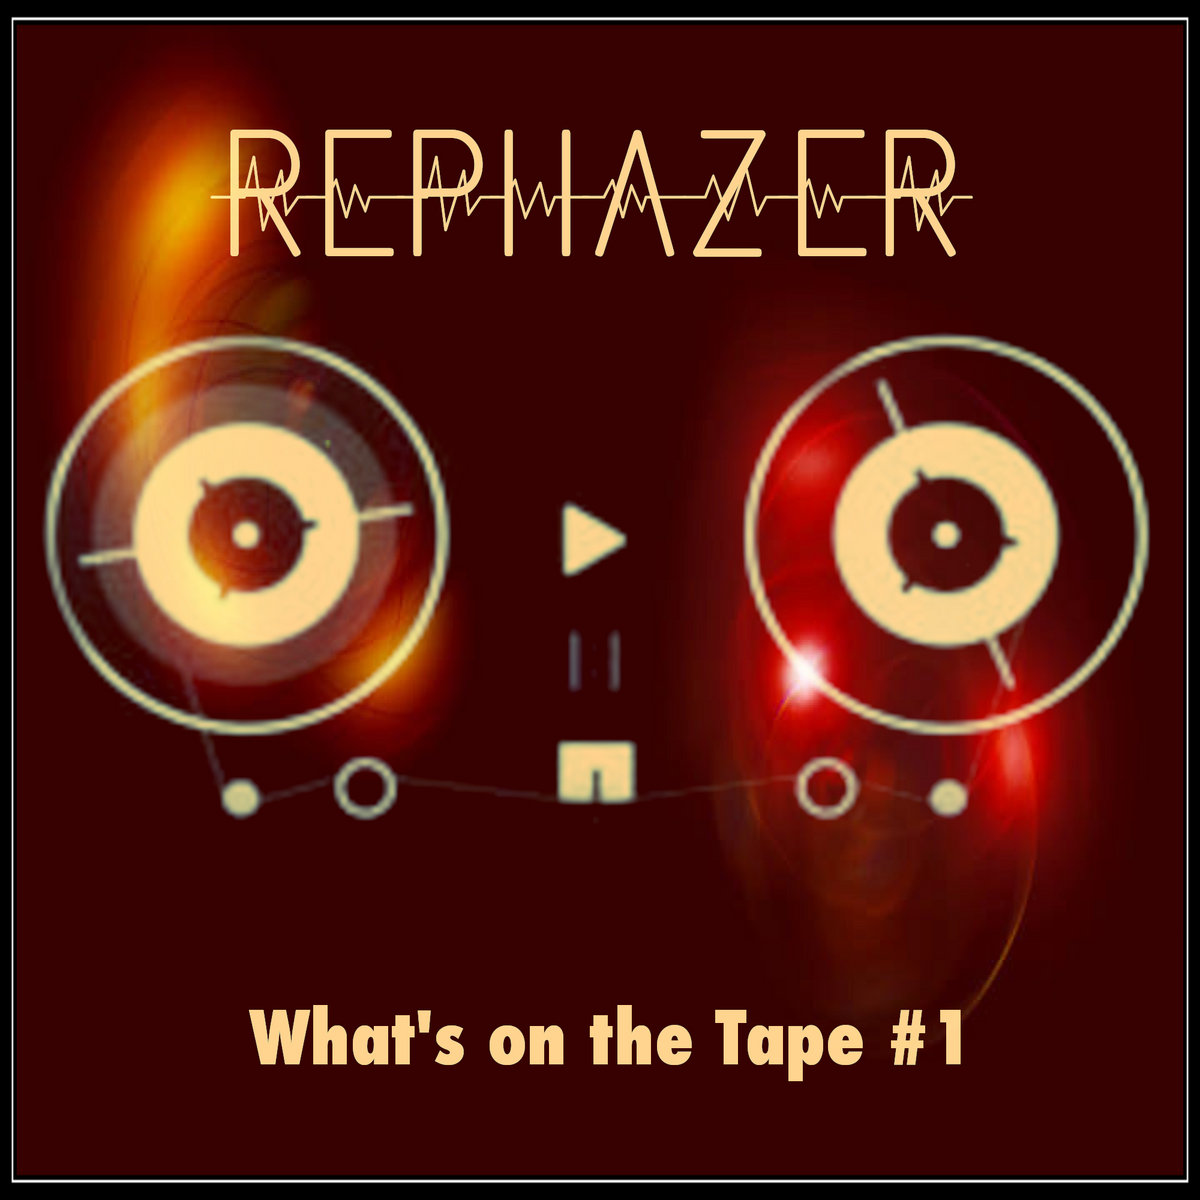 Rephazer – What’s on the Tape #1 (Digital, 2023)